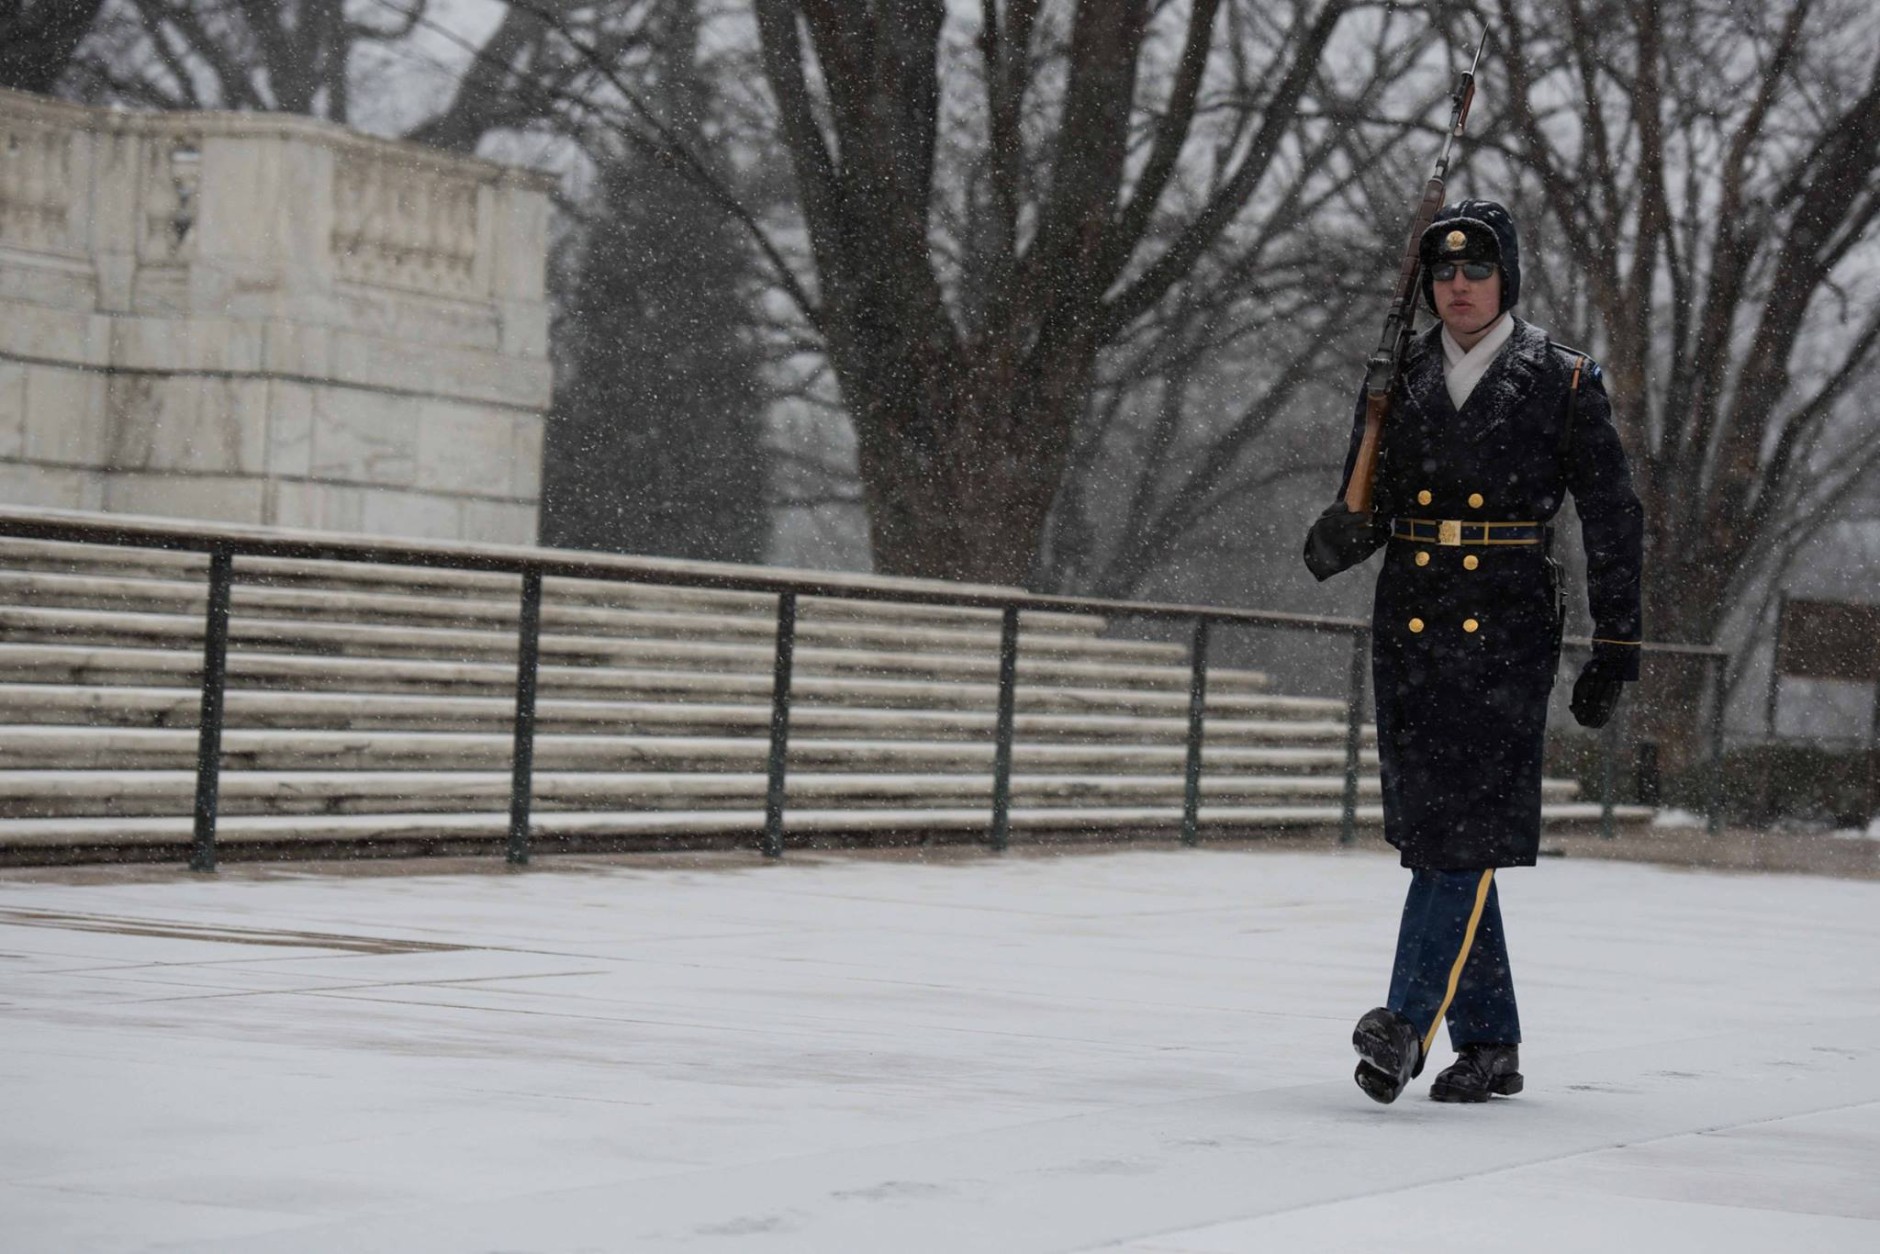 As a record breaking snow storm hits the Washington DC area Sentinels from the 3d U.S. Infantry Regiment (The Old Guard) continue to stand guard at the Tomb of the Unknown Soldier. (U.S. Army/Cpl. Cody W. Torkelson)